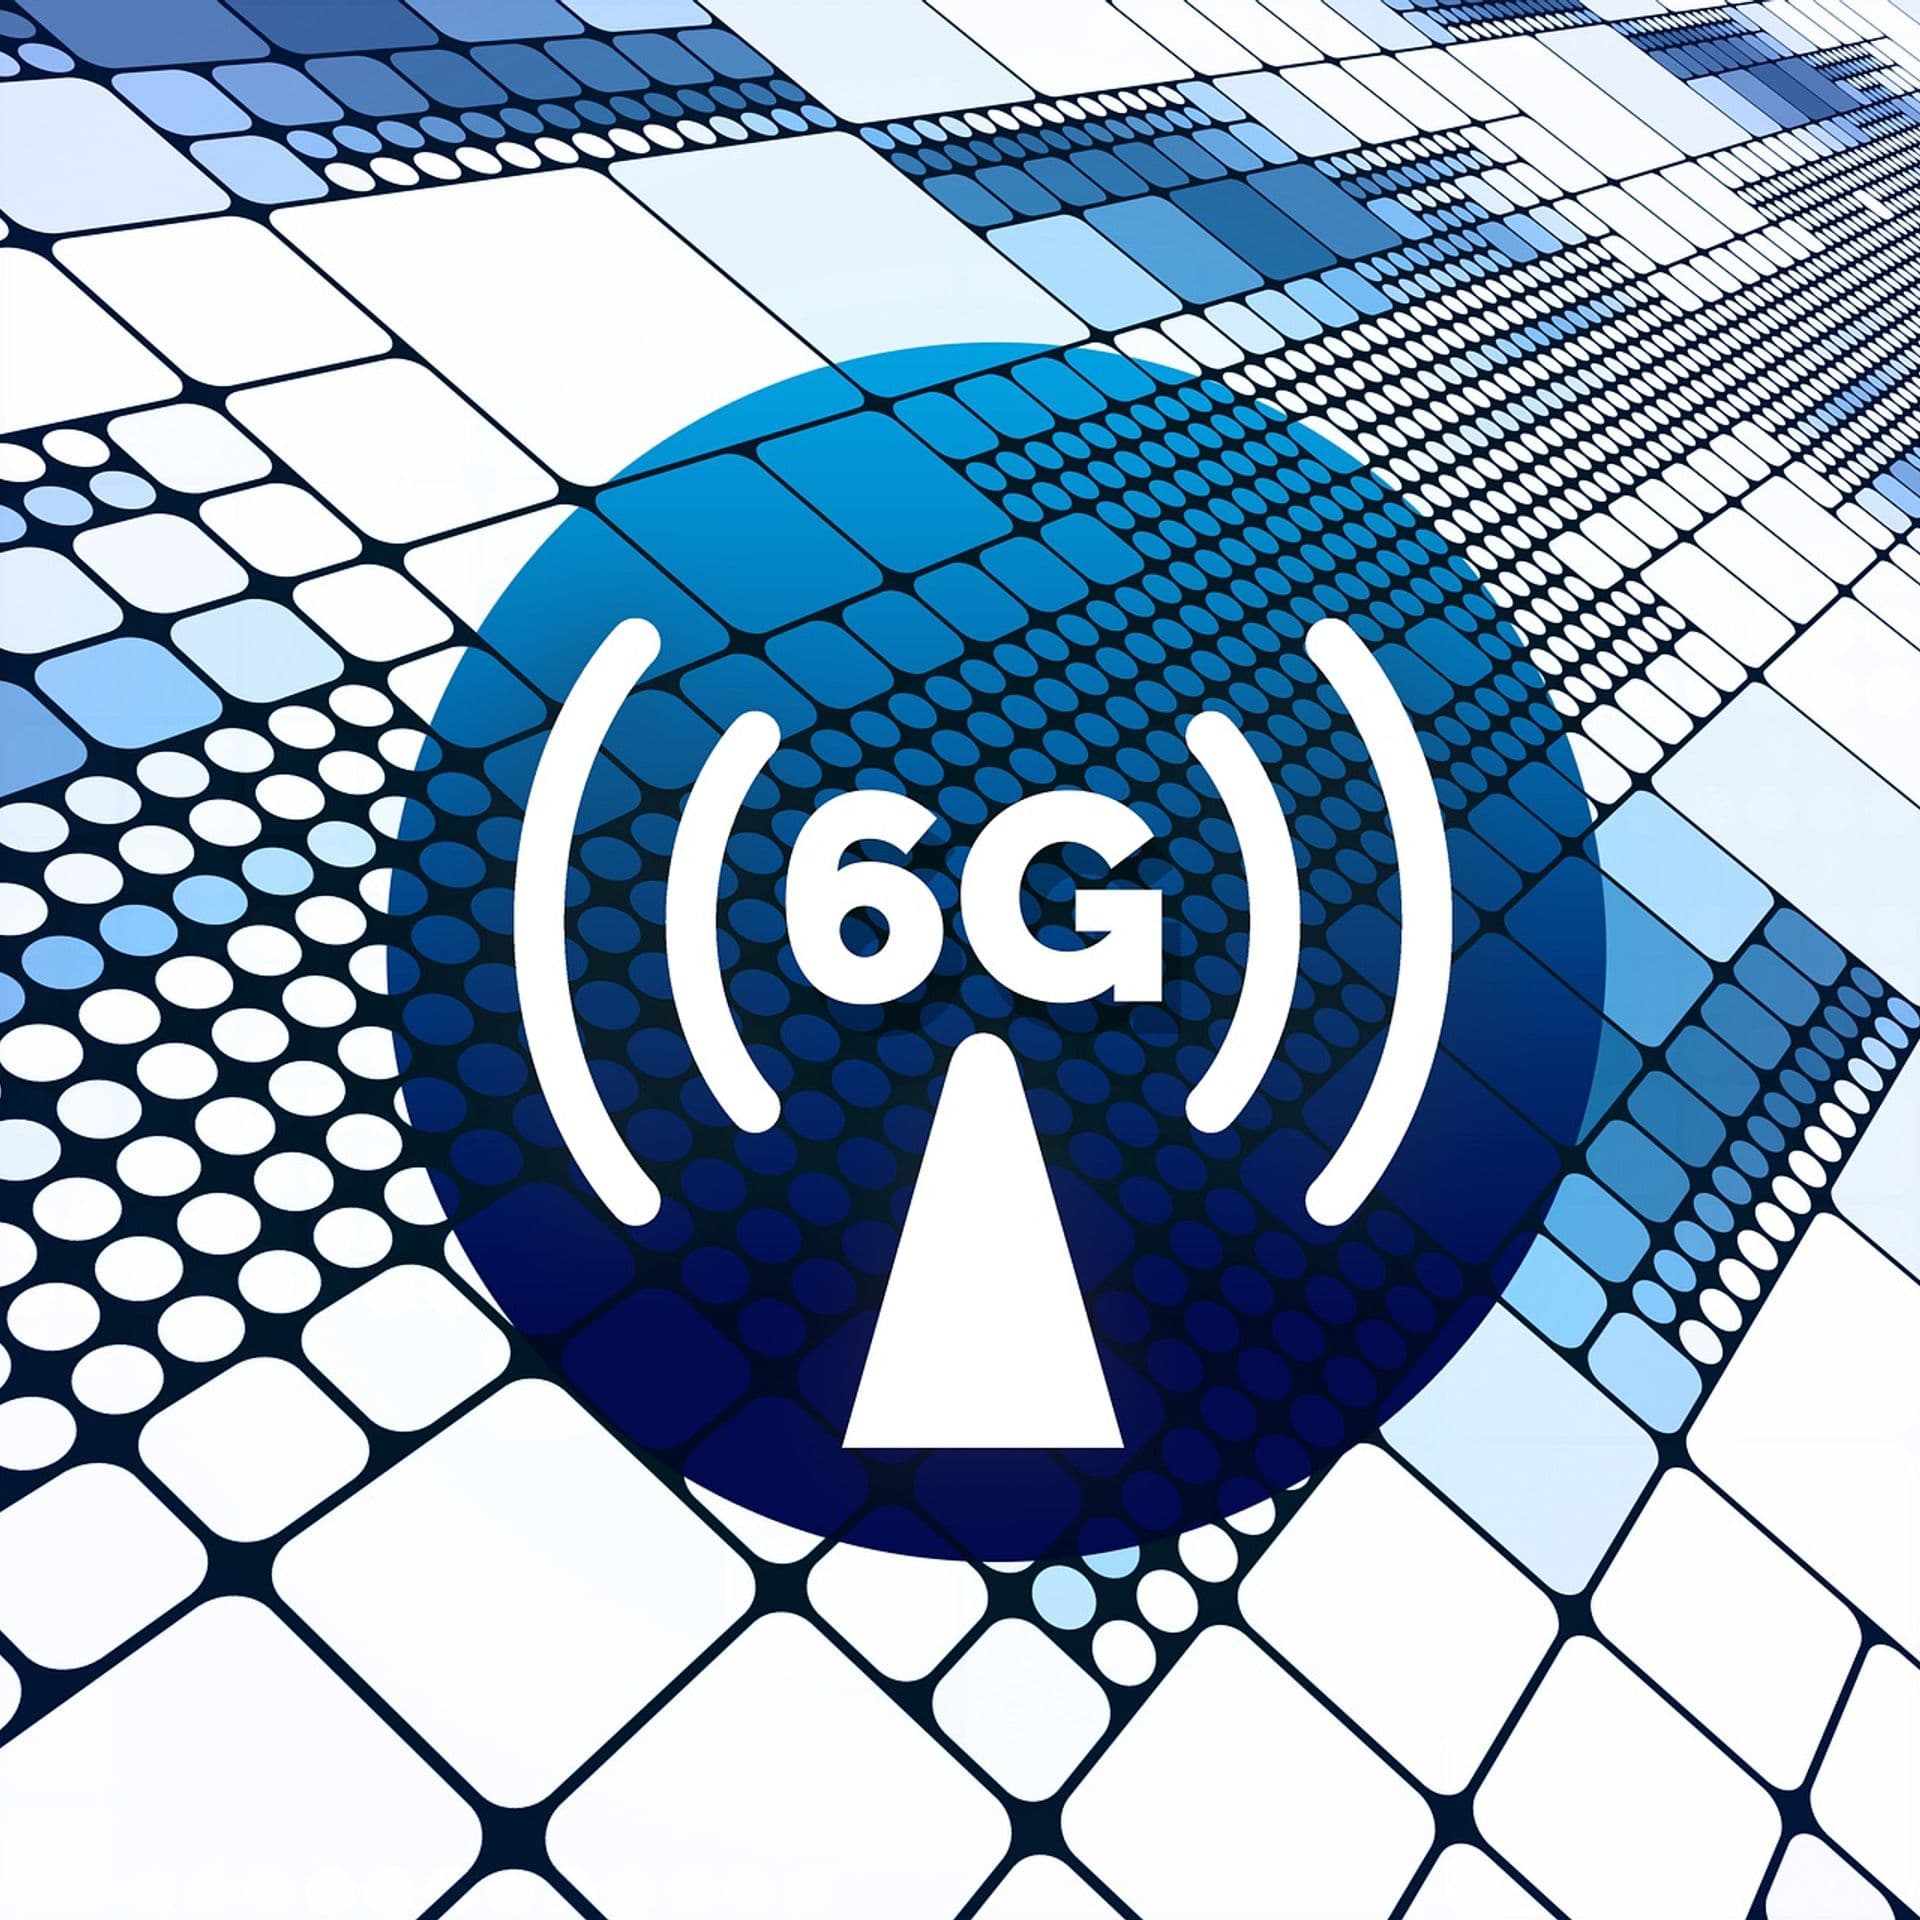 6G technology: The next frontier in digital connectivity